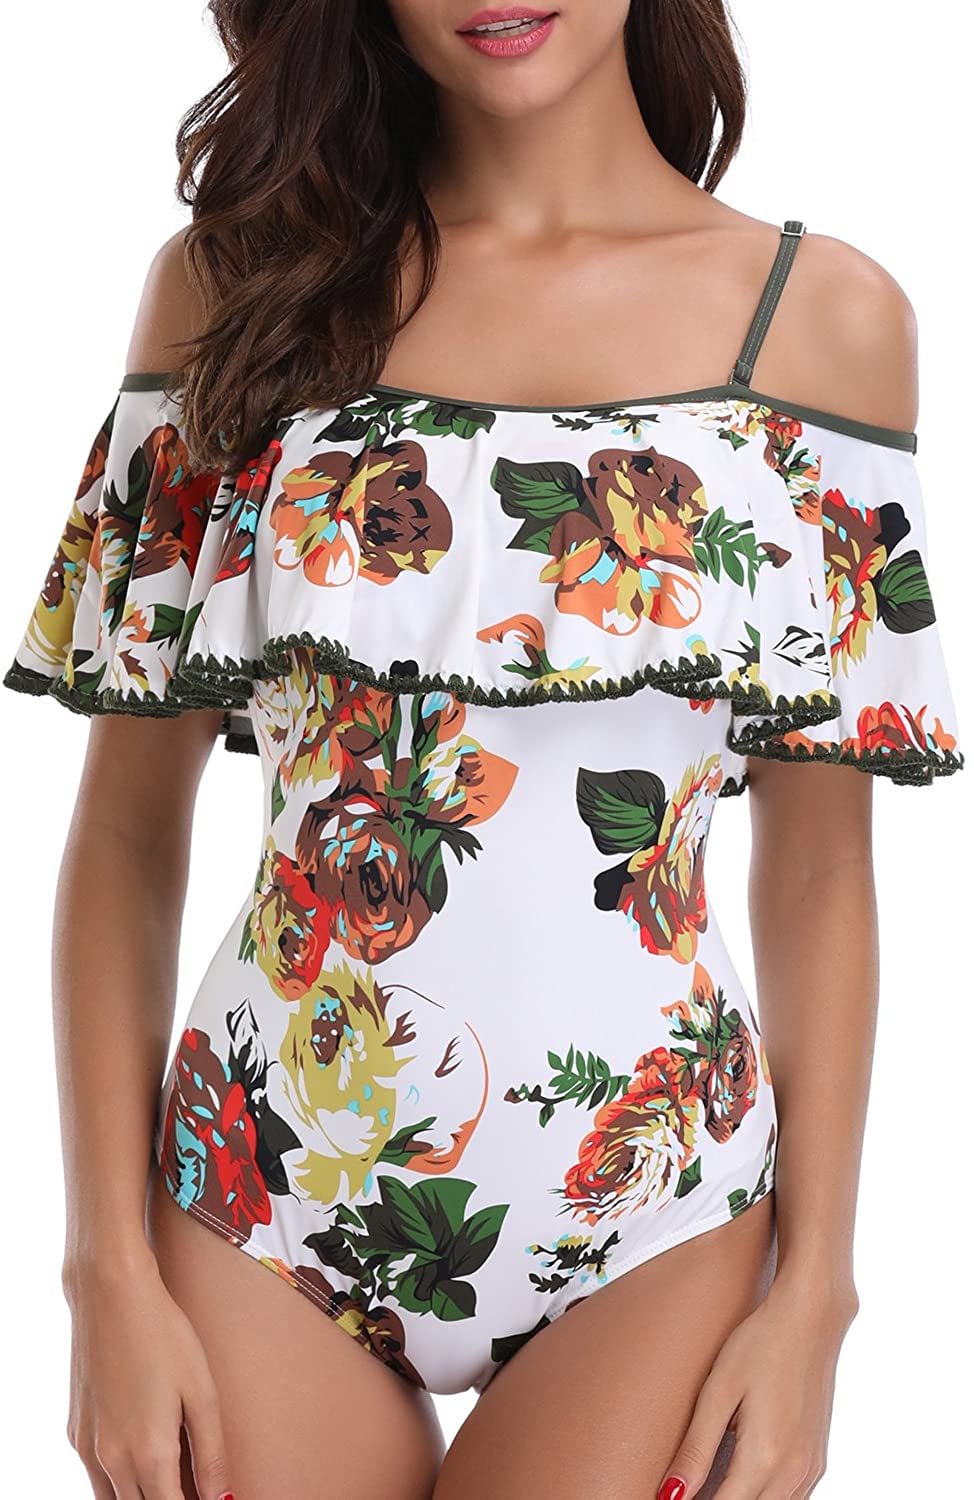 Vintage Off Shoulder Ruffled Bathing Suits Women's One Piece Swimsuit